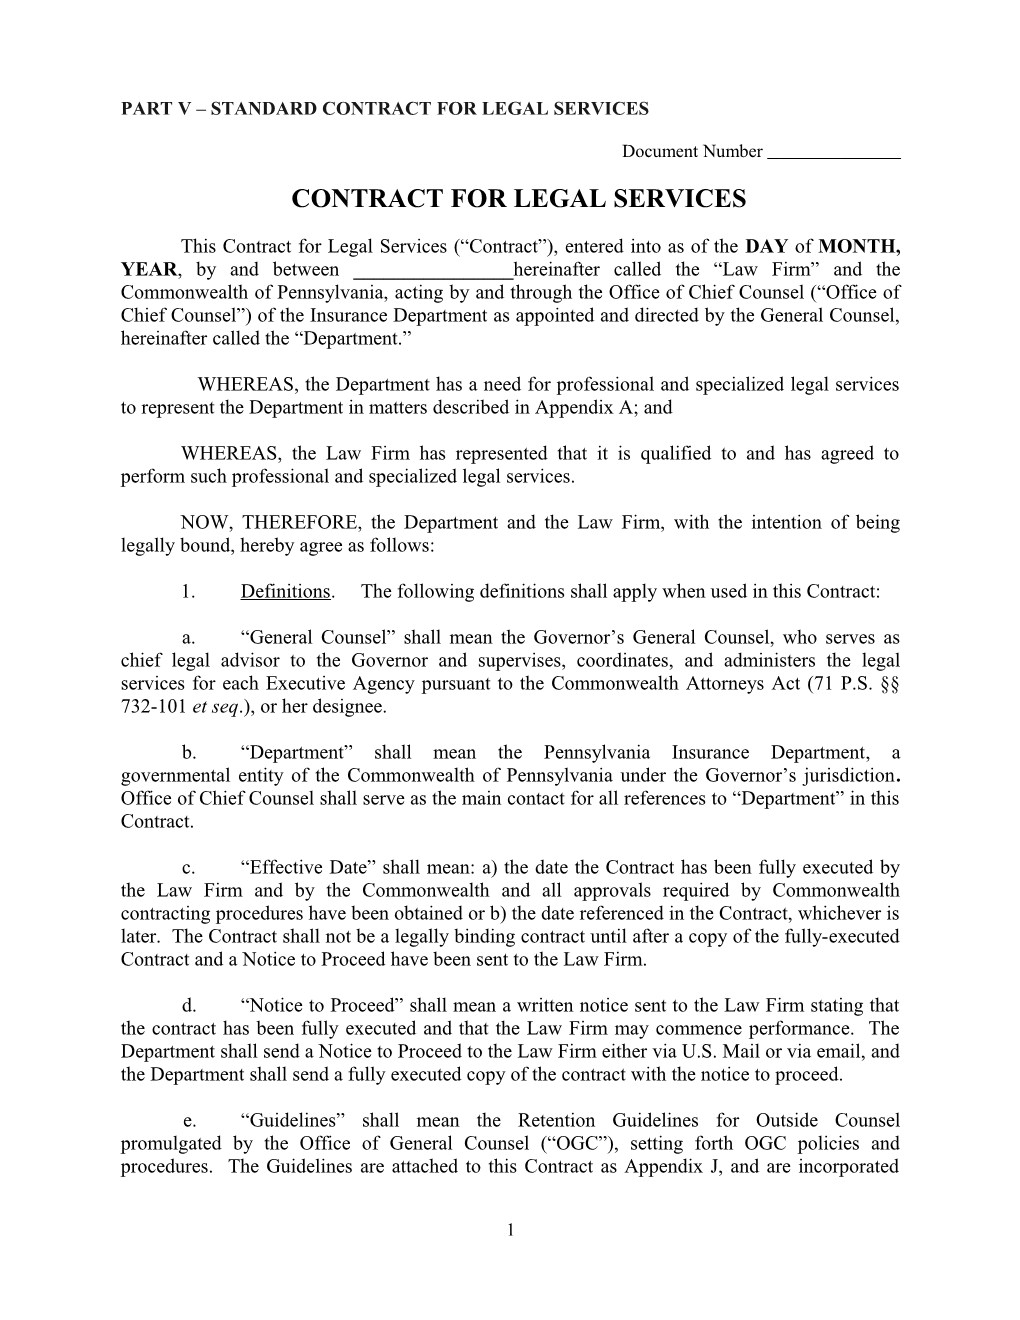 Part V Standard Contract for Legal Services